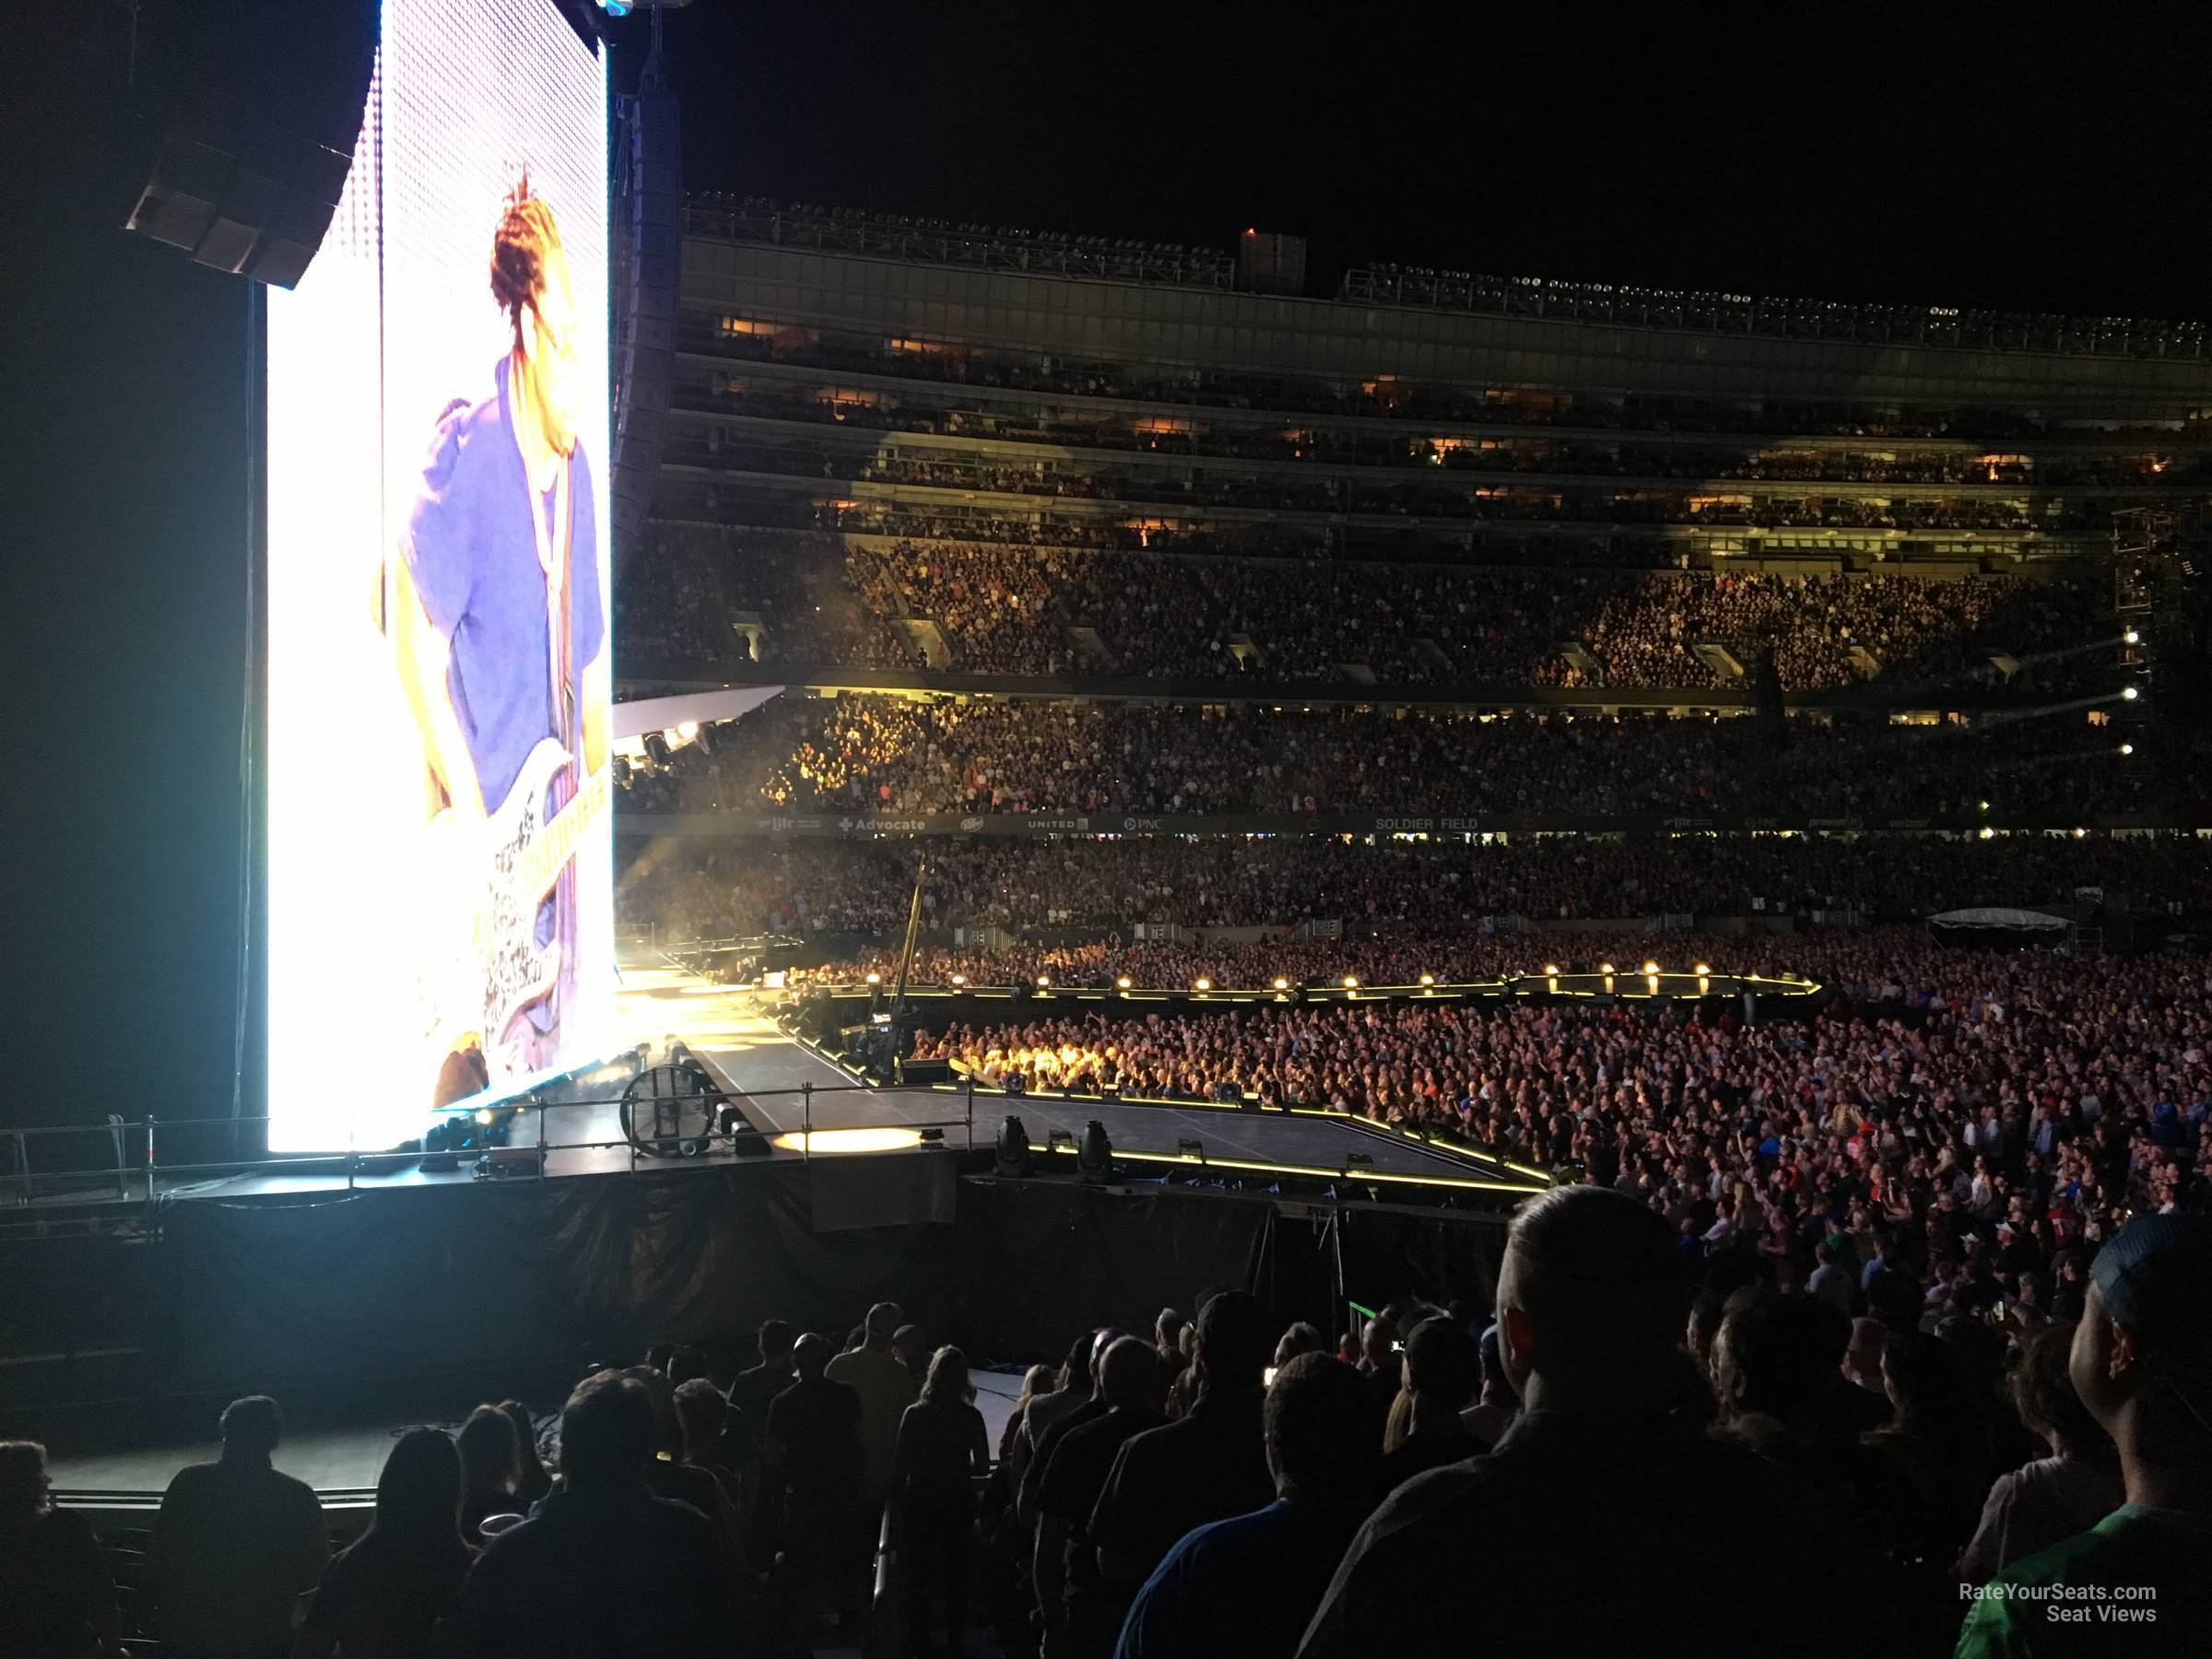 section 143, row 19 seat view  for concert - soldier field